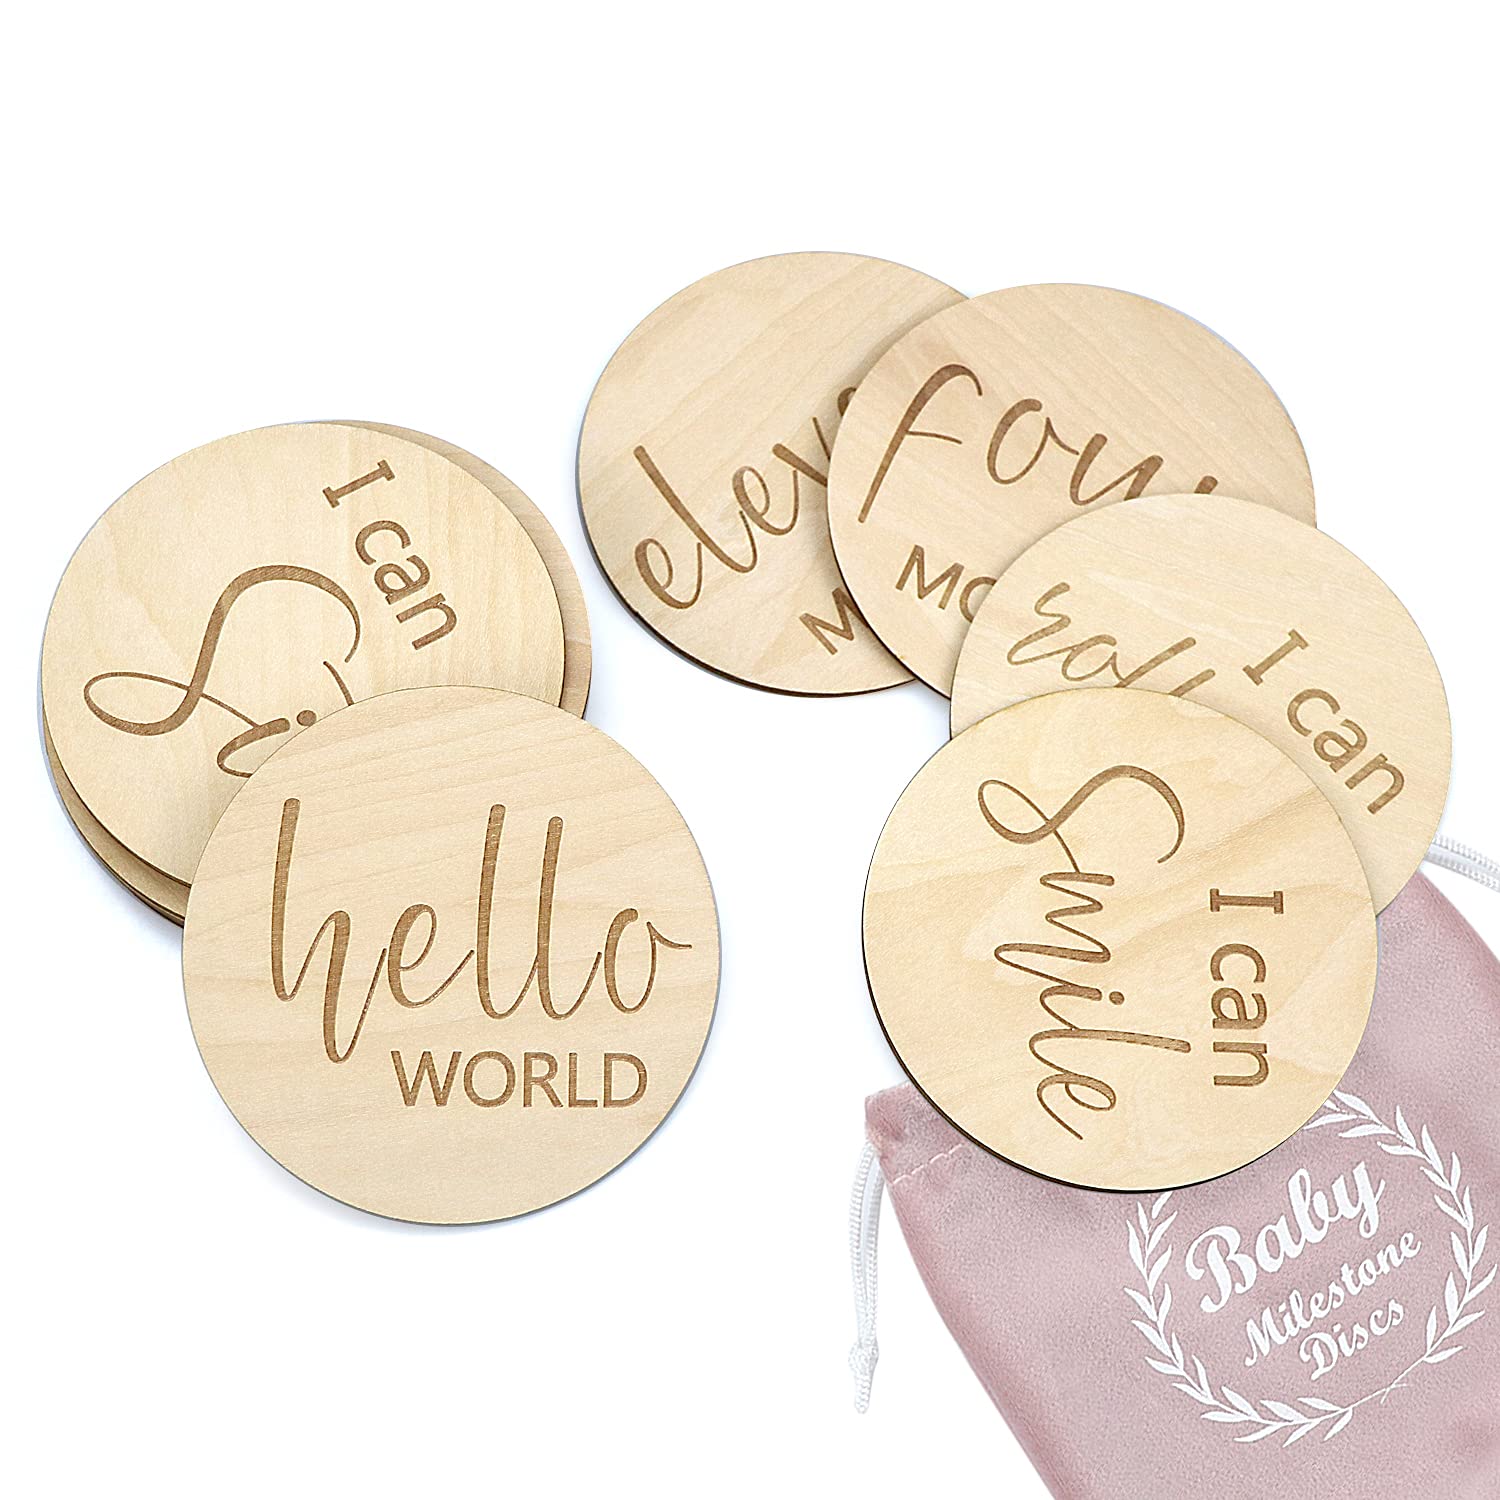 Baby Milestone Cards Wooden Infant First and Monthly Cards Double Sided Engraved Photo Prop Discs,Gift Sets for Baby Shower and Newborn,Set of 13 Come with Velvet Gift Bag